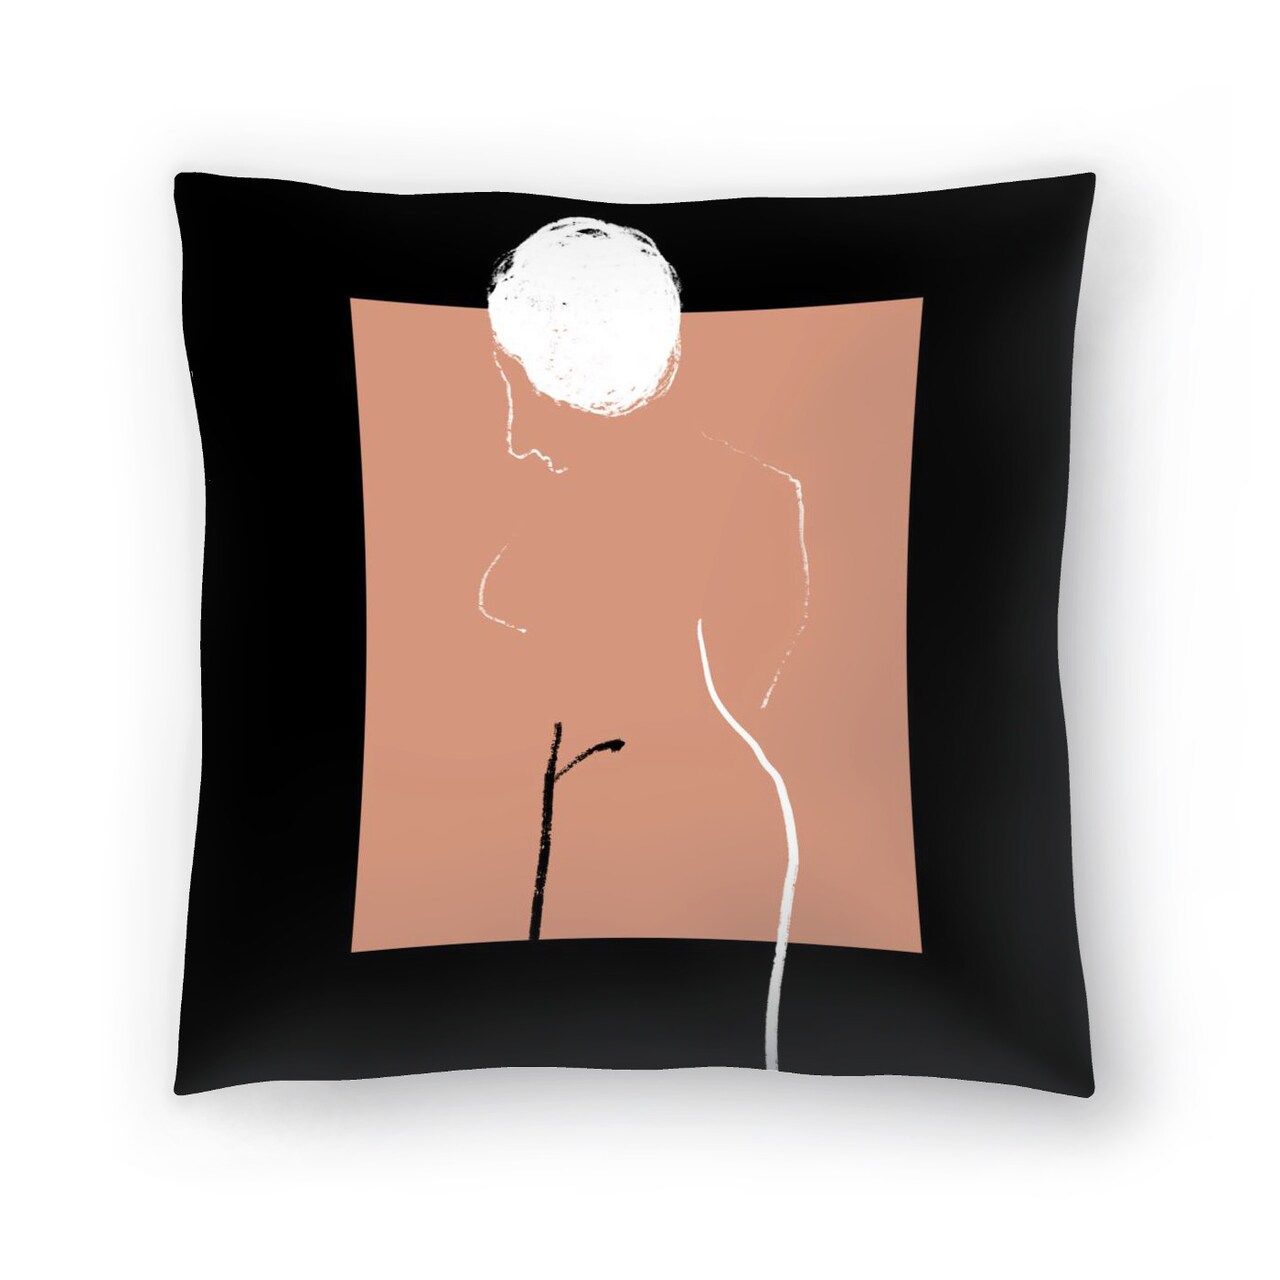 Artistic Nude by Atelier Posters Throw Pillow Americanflat Decorative Pillow